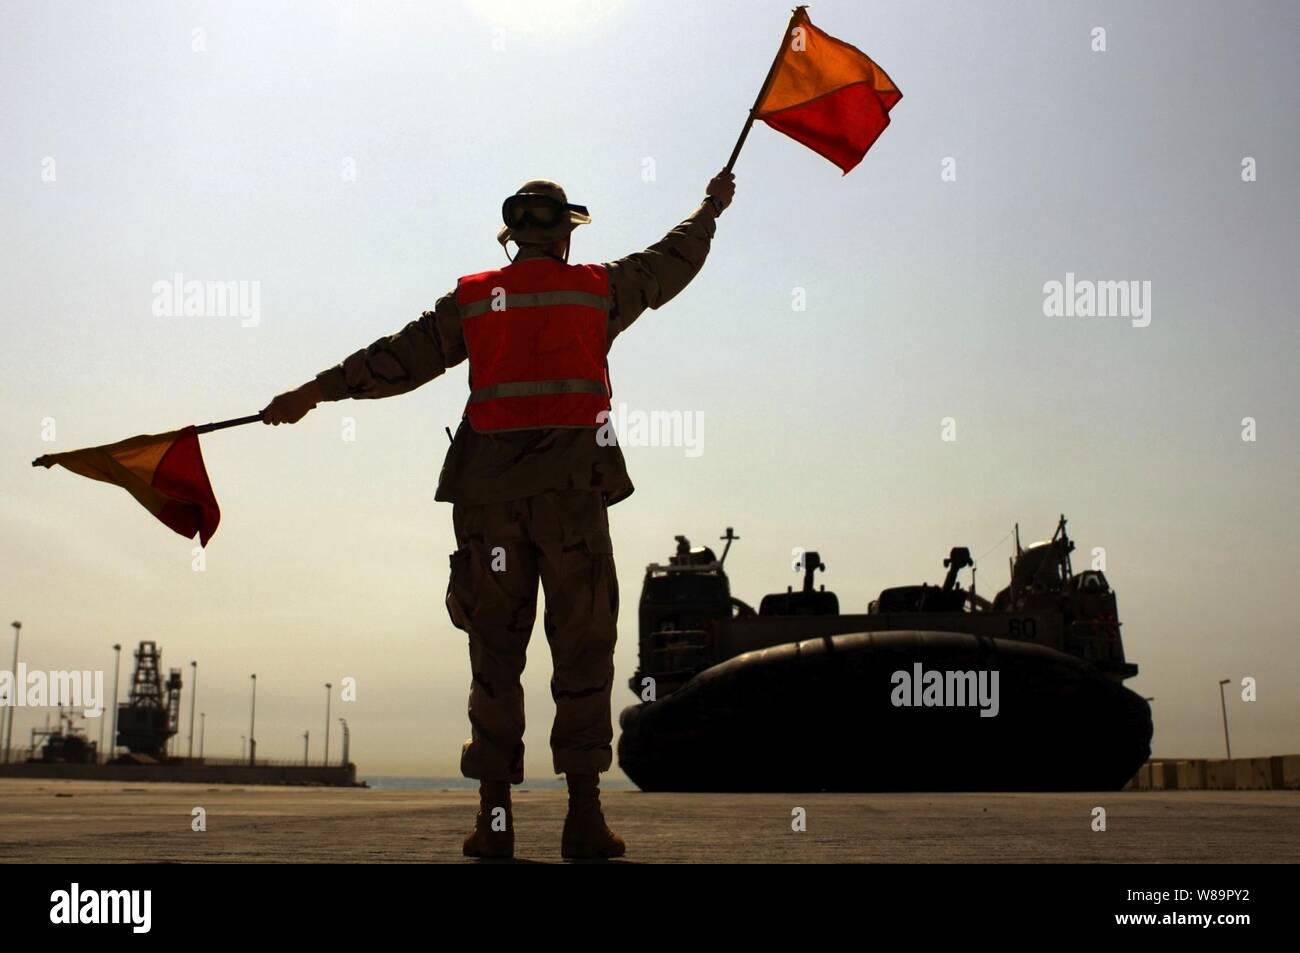 Navy Seaman Charles Shafer, from Beach Master Unit 2, uses flags to signal to the craftmaster of a Navy Landing Craft Air Cushion, or LCAC, at a Kuwaiti Naval Base staging area on June 1, 2005.  The LCAC, assigned to Assault Craft Unit 4 based in Little Creek, Va., is deployed in the Northern Persian Gulf with the USS Kearsarge (LHD 3) and USS Ashland (LSD 48) in support of transport operations with the 26th Marine Expeditionary Unit. Stock Photo